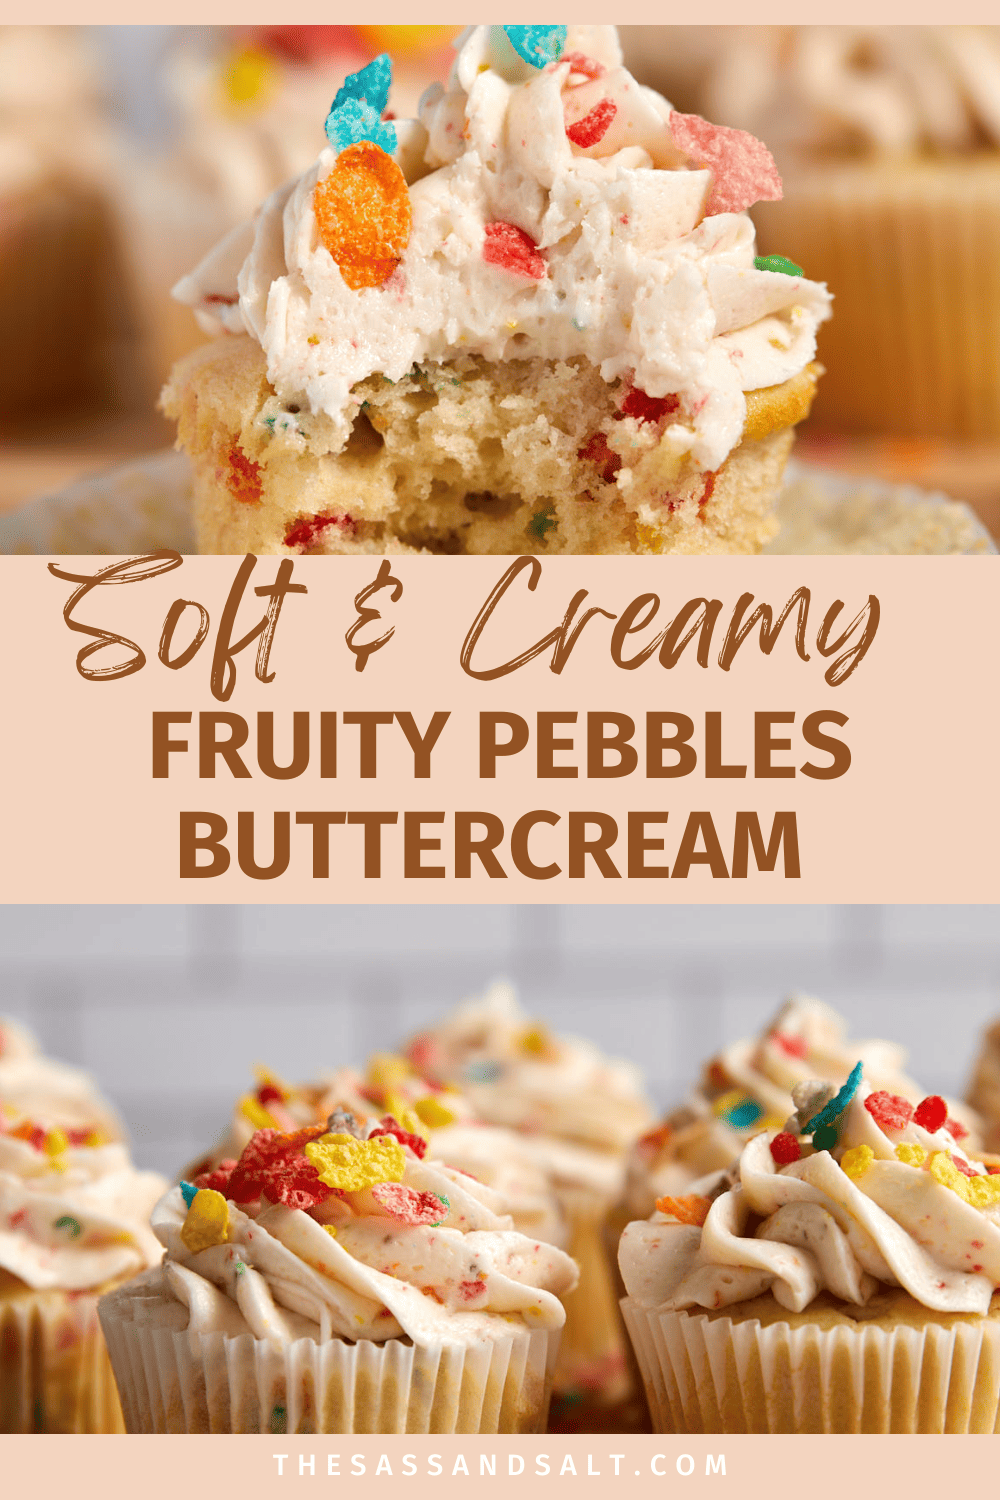 A Pinterest graphic showcasing Soft & Creamy Fruity Pebbles Buttercream, with an image of a cupcake cut in half to reveal the colorful cereal pieces in the frosting and cake, above whole cupcakes decorated with the vibrant buttercream,